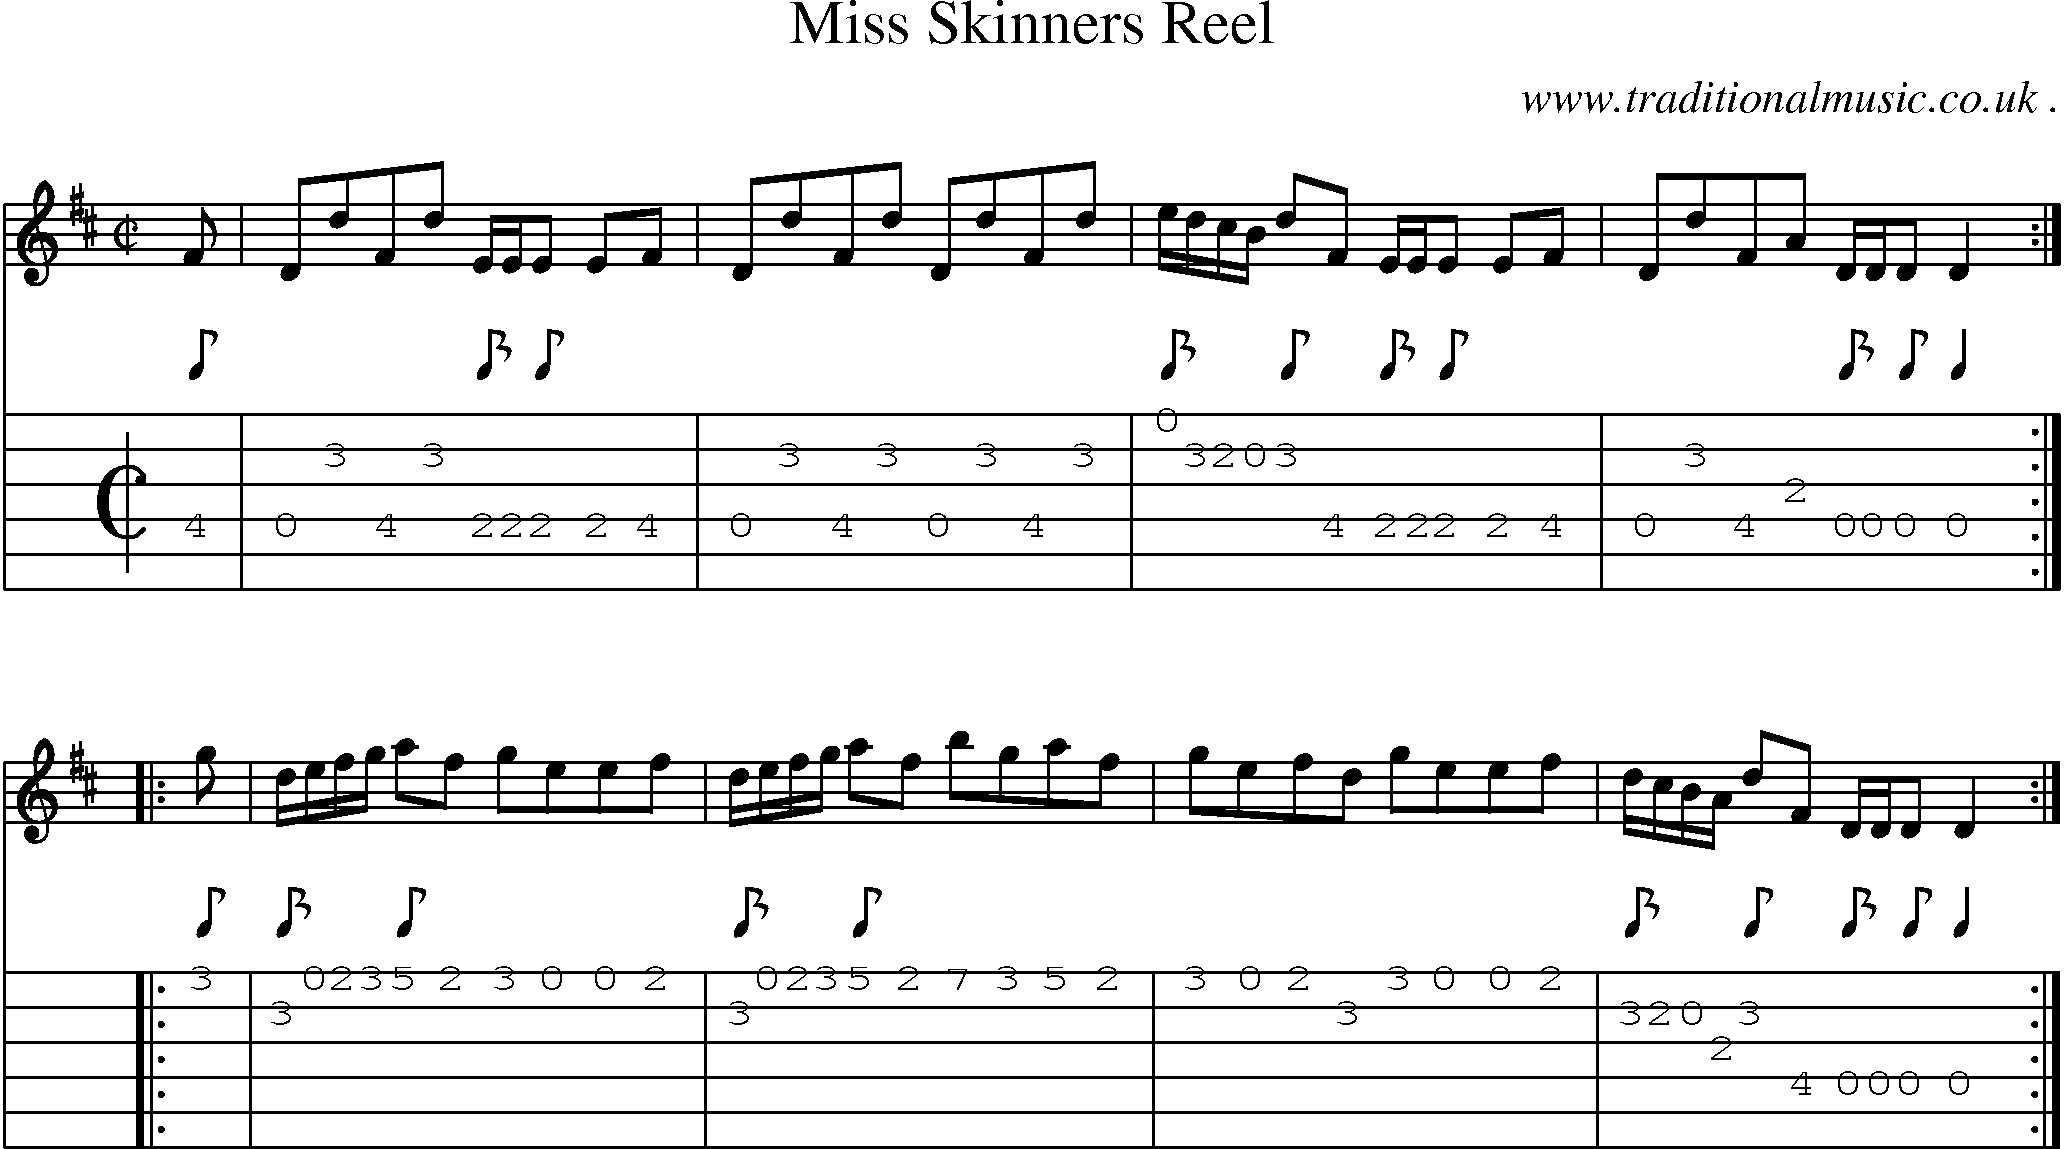 Sheet-Music and Guitar Tabs for Miss Skinners Reel